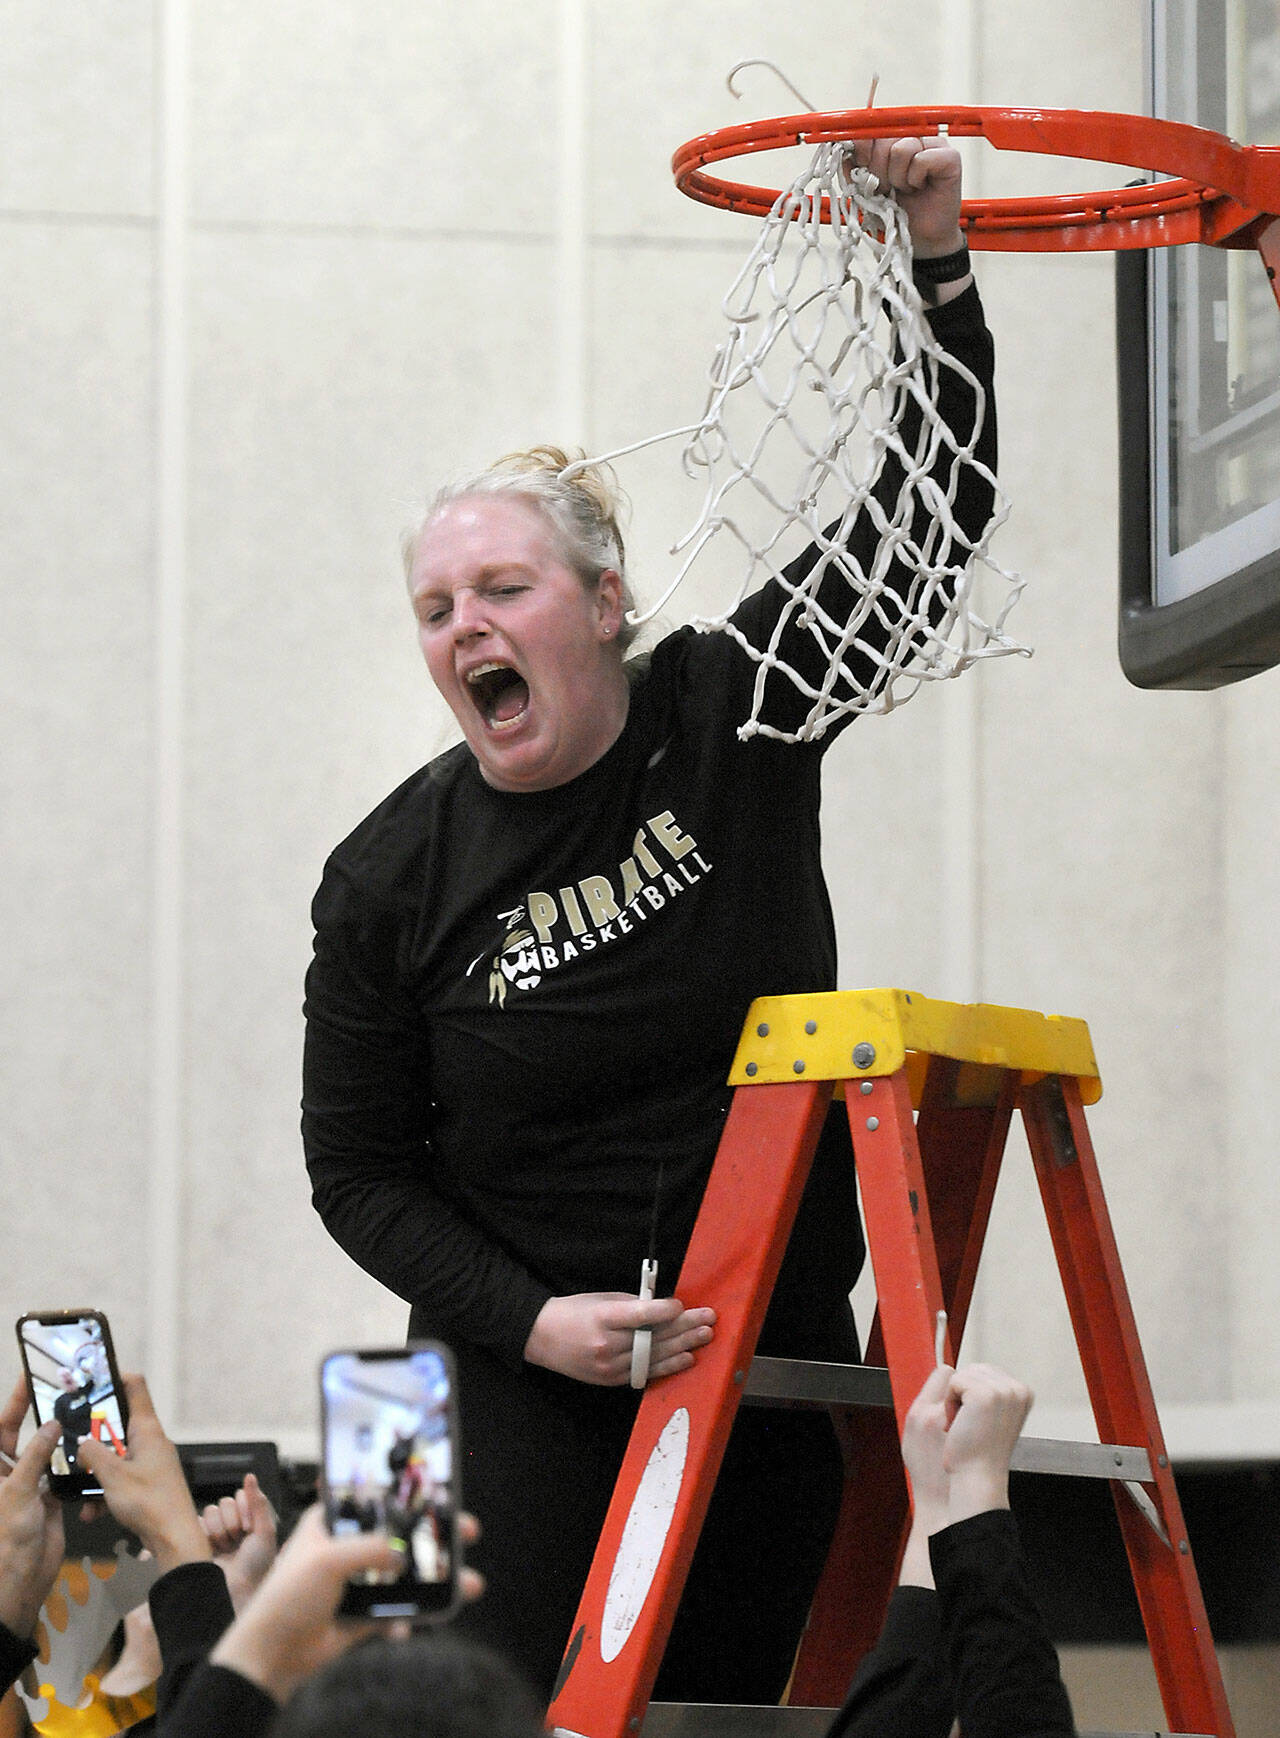 Peninsula Pirates head coach Ali Crumb emits a scream of excitement as she cuts down the net after her team clinched the NWAC North Region championship by defeating Everett on Wednesday in Port Angeles. (Keith Thorpe/Peninsula Daily News)